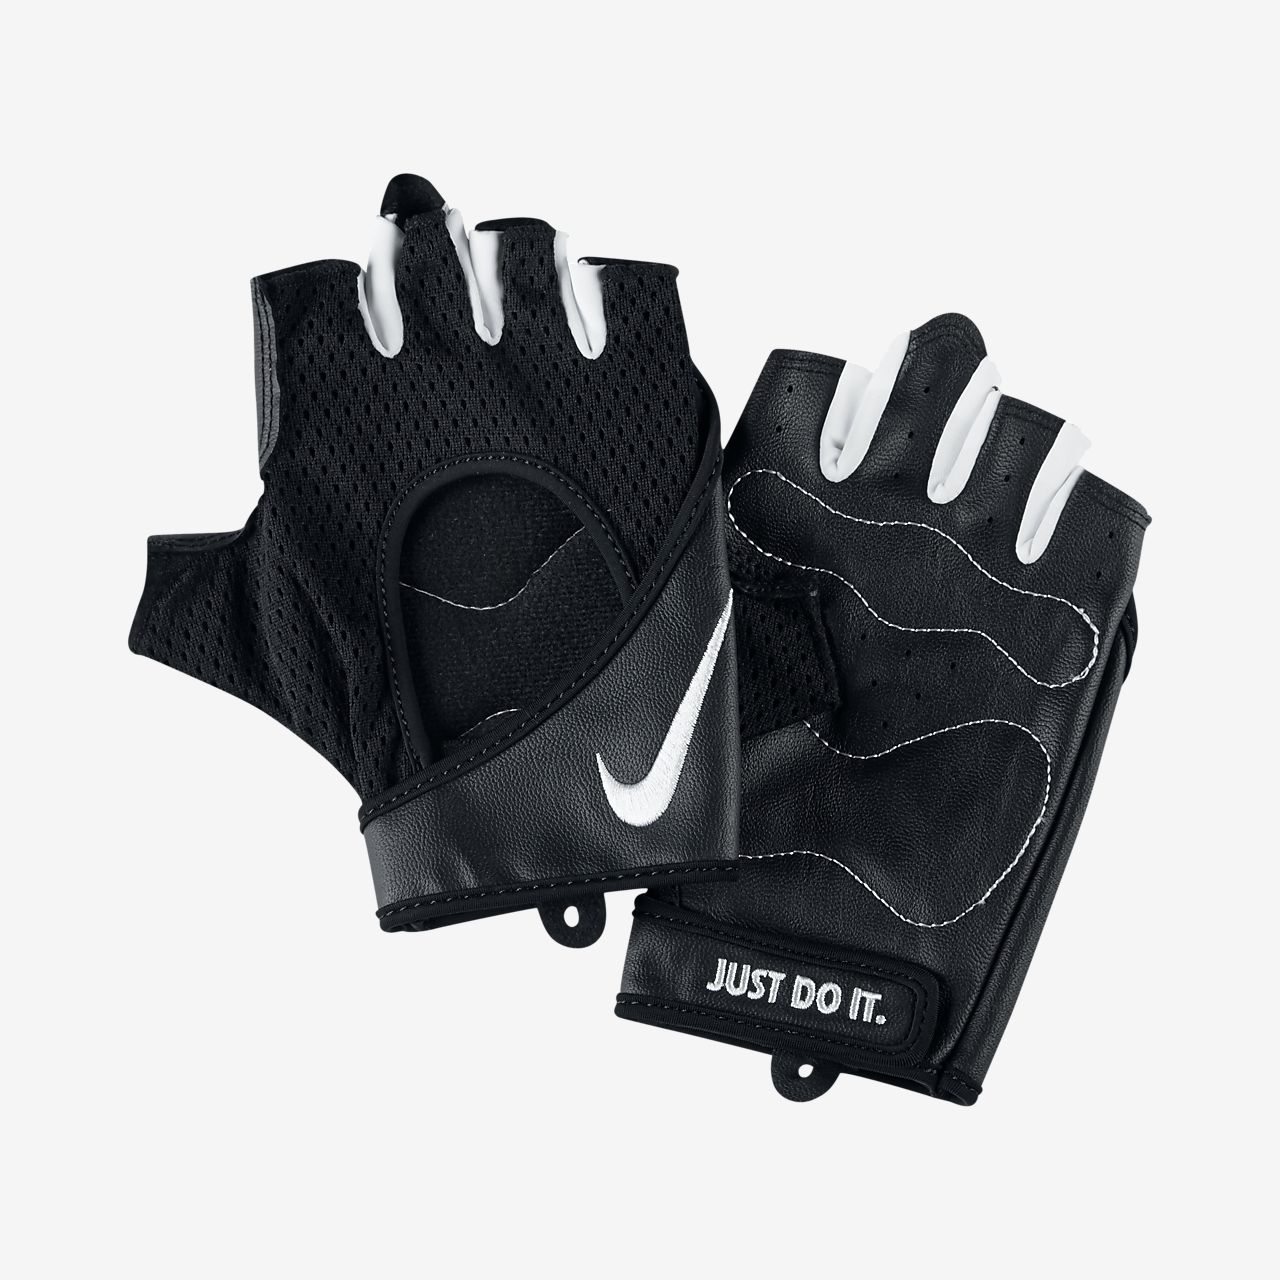 nike gym gloves for ladies